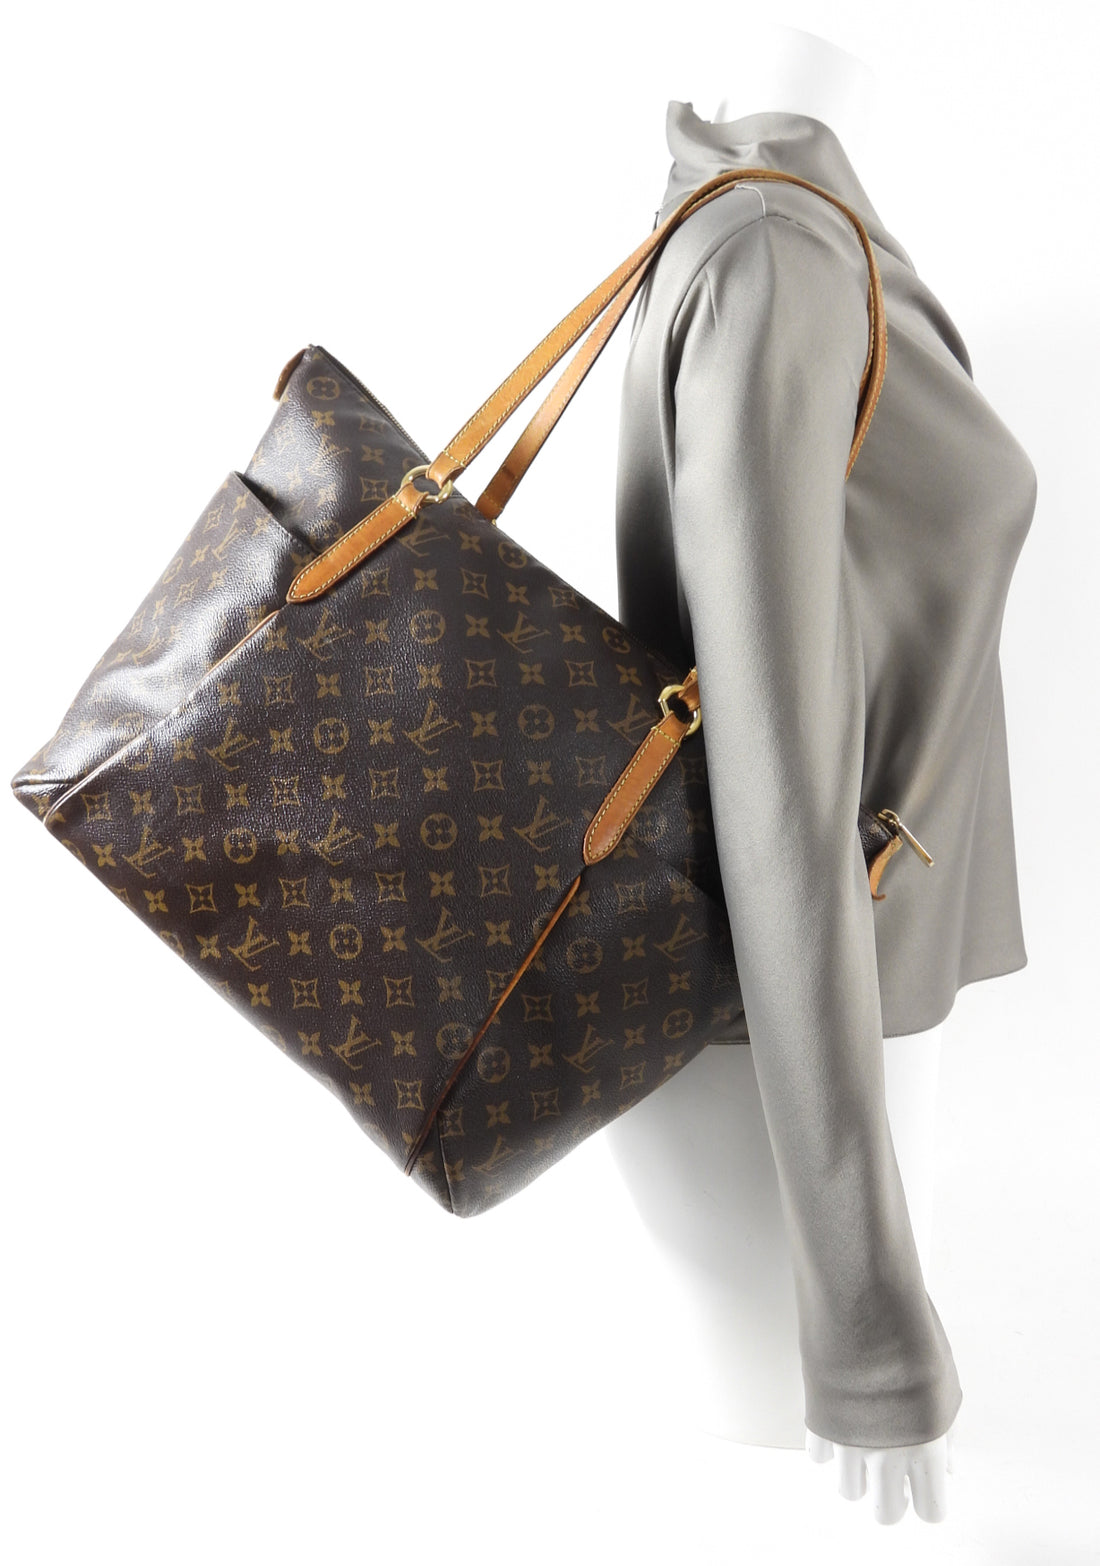 Louis-Vuitton-Monogram-Totally-GM-Tote-Bag-M56690 – dct-ep_vintage luxury  Store